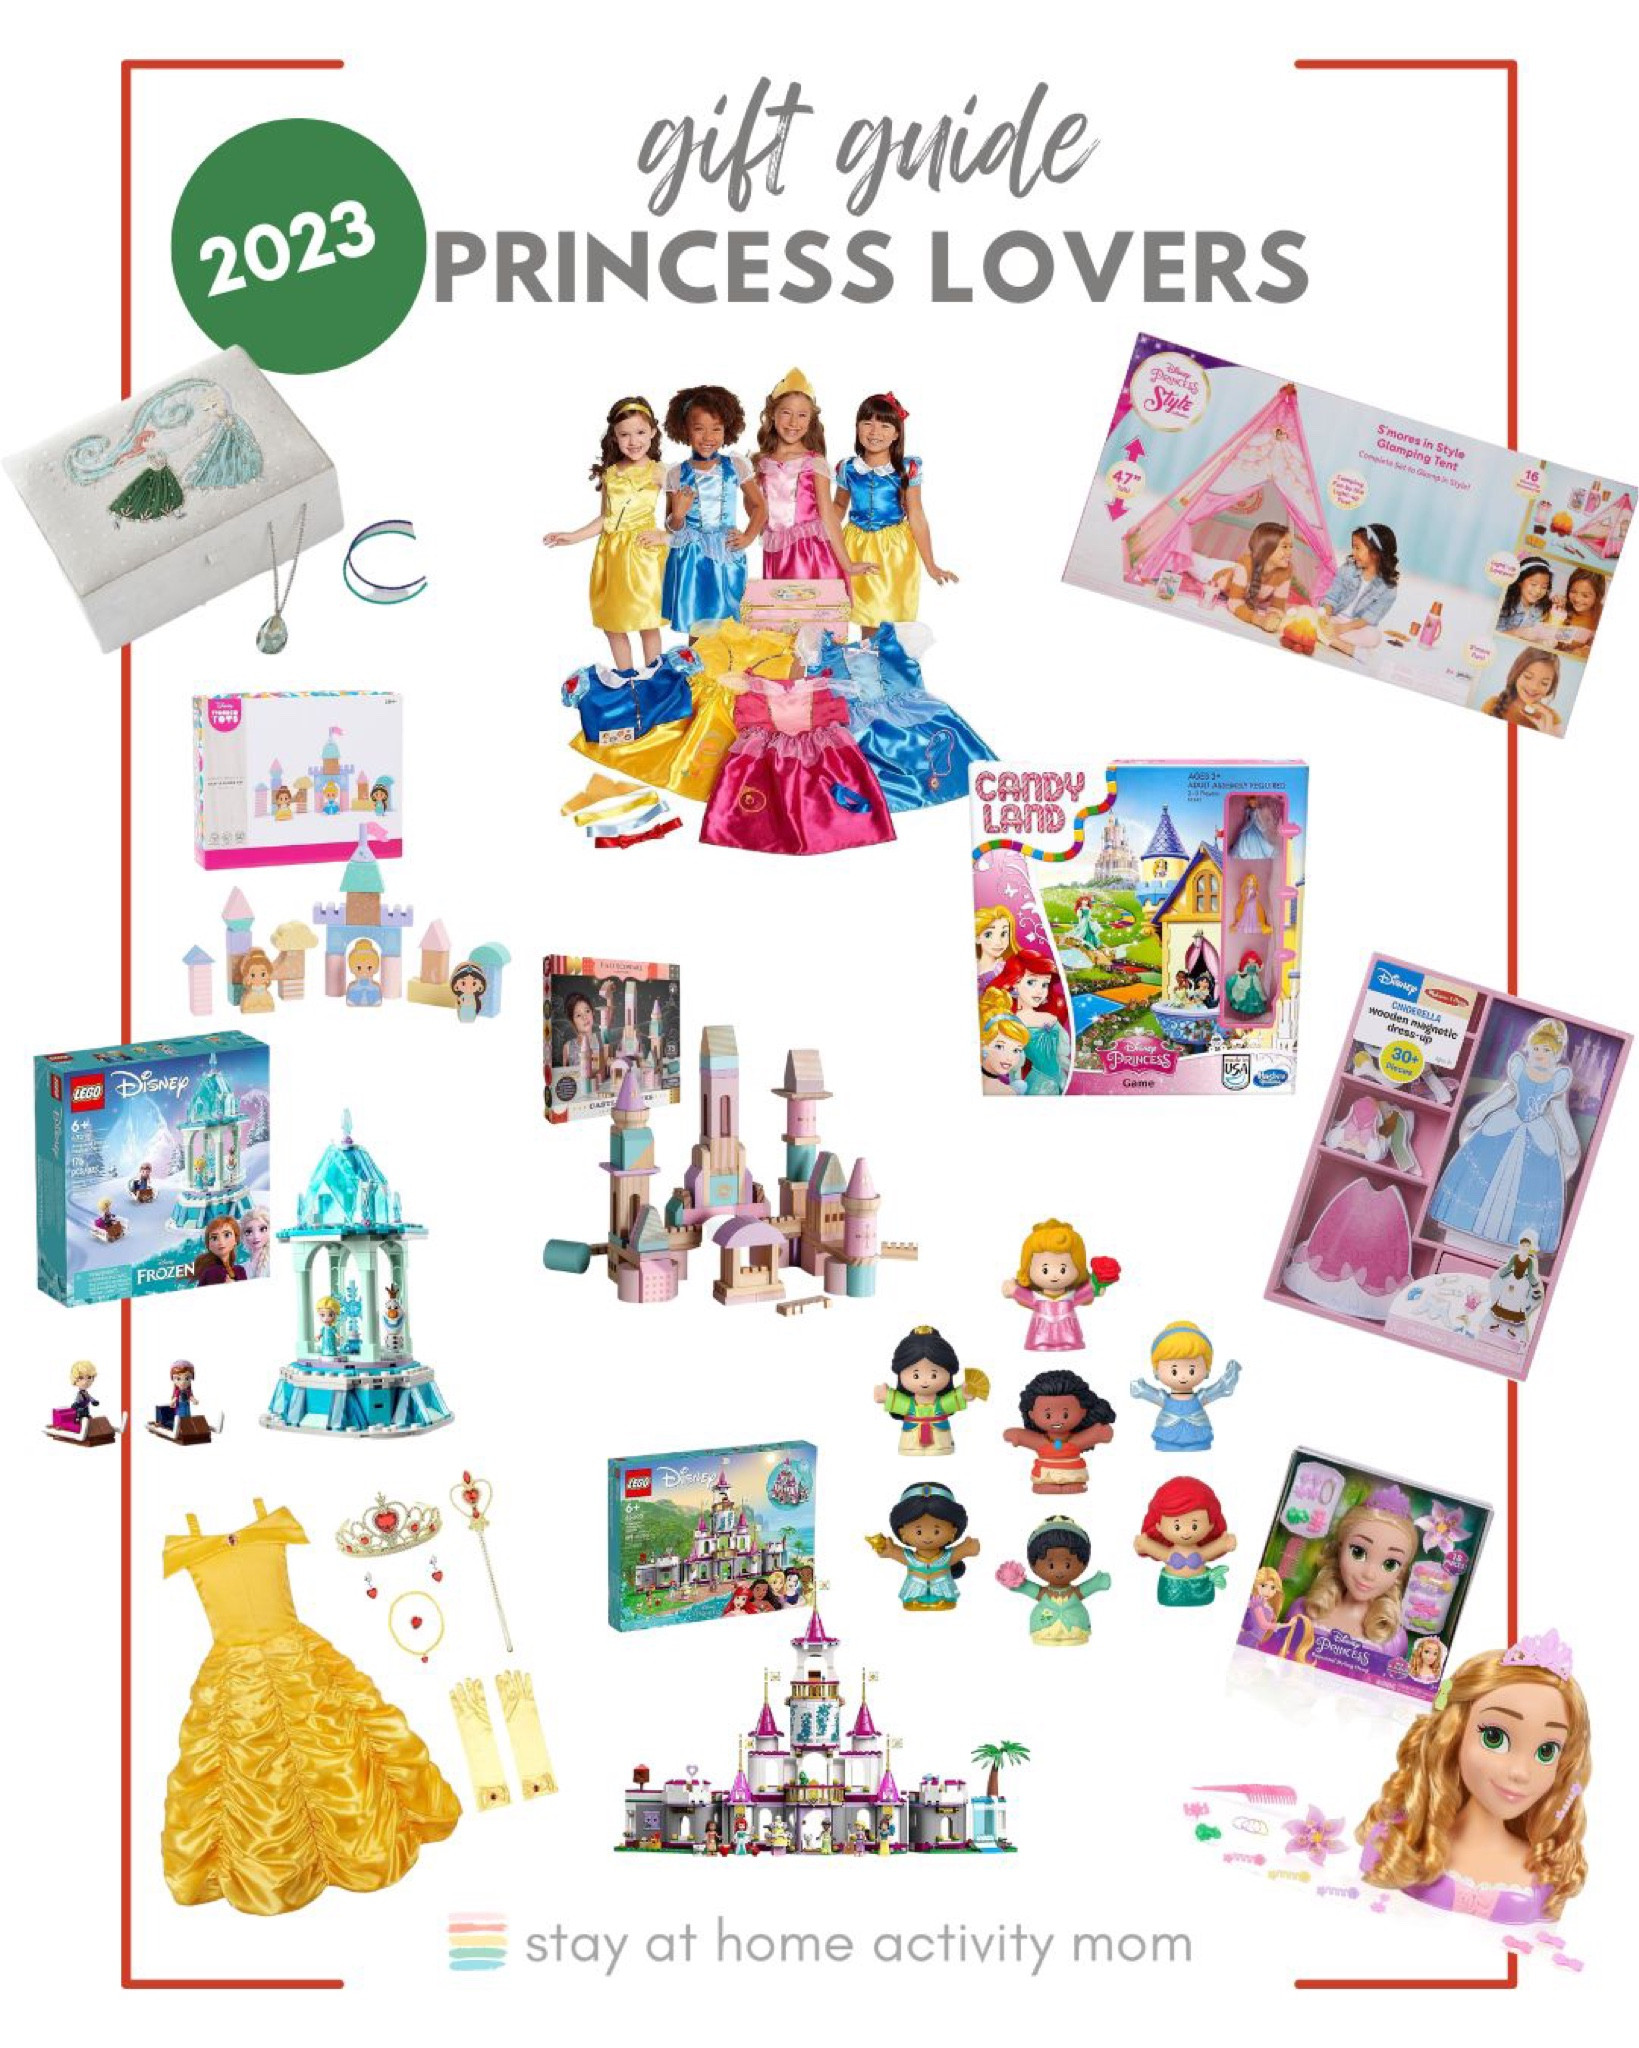 Disney Lover's Gift Guide for Adults 